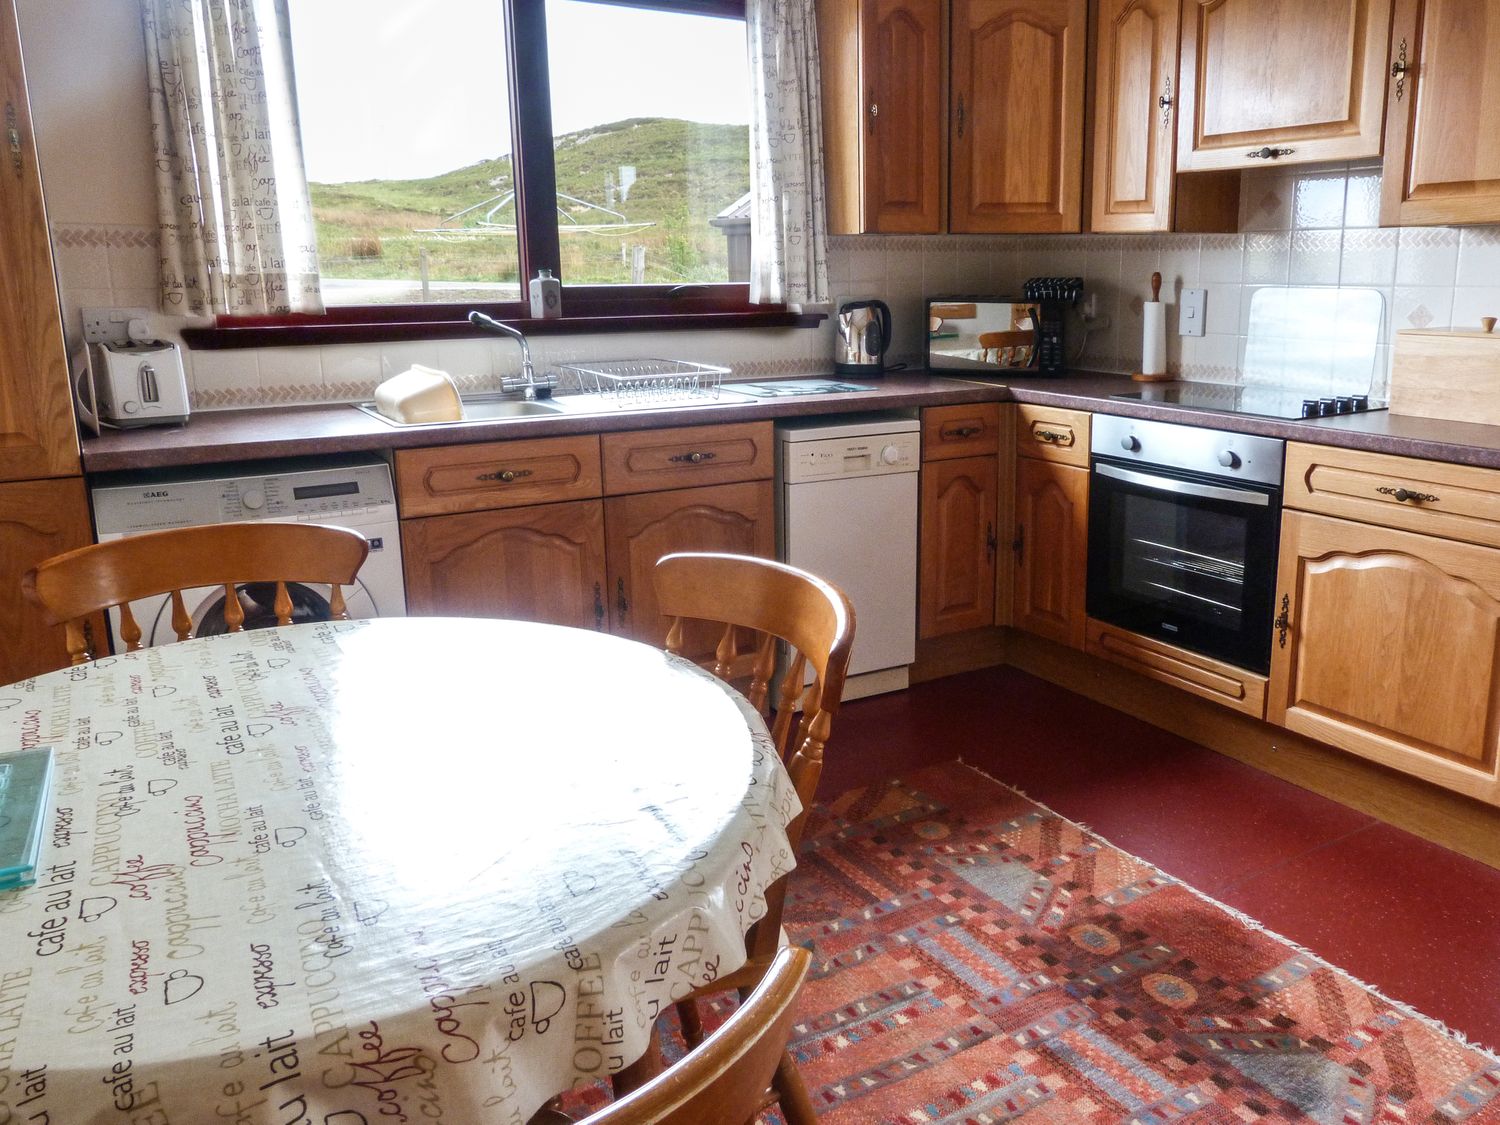 2 BAYVIEW BUNGALOW, Scotland, Scottish Highlands, Ross and Cromarty, Poolewe